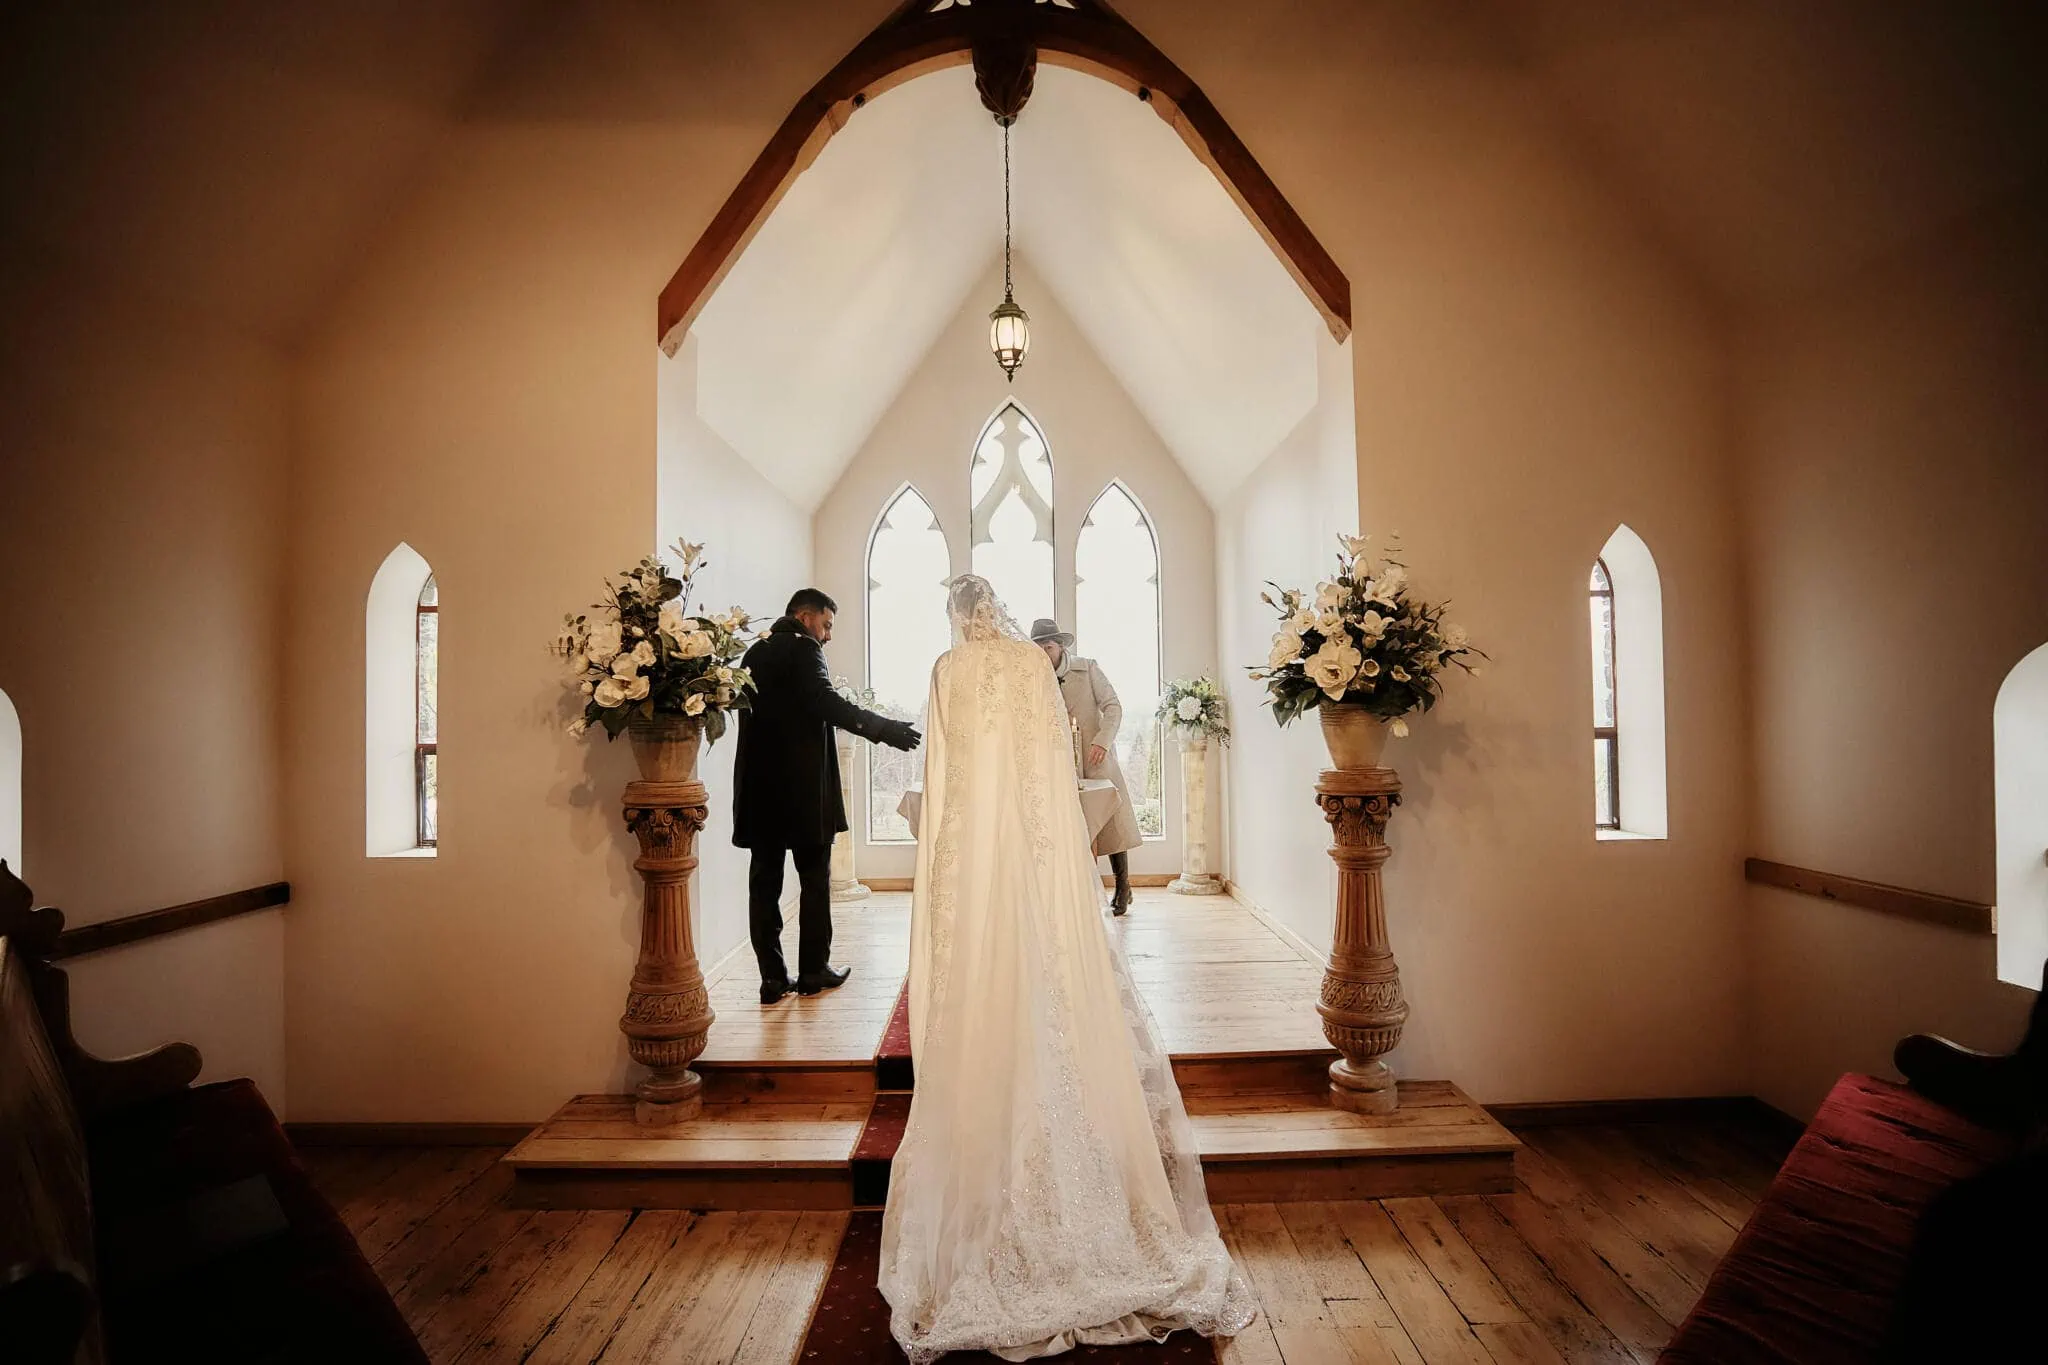 Queenstown New Zealand Elopement Wedding Photographer - Wasim and Yumn's Islamic wedding in Queenstown, with the bride and groom walking down the aisle of a church.